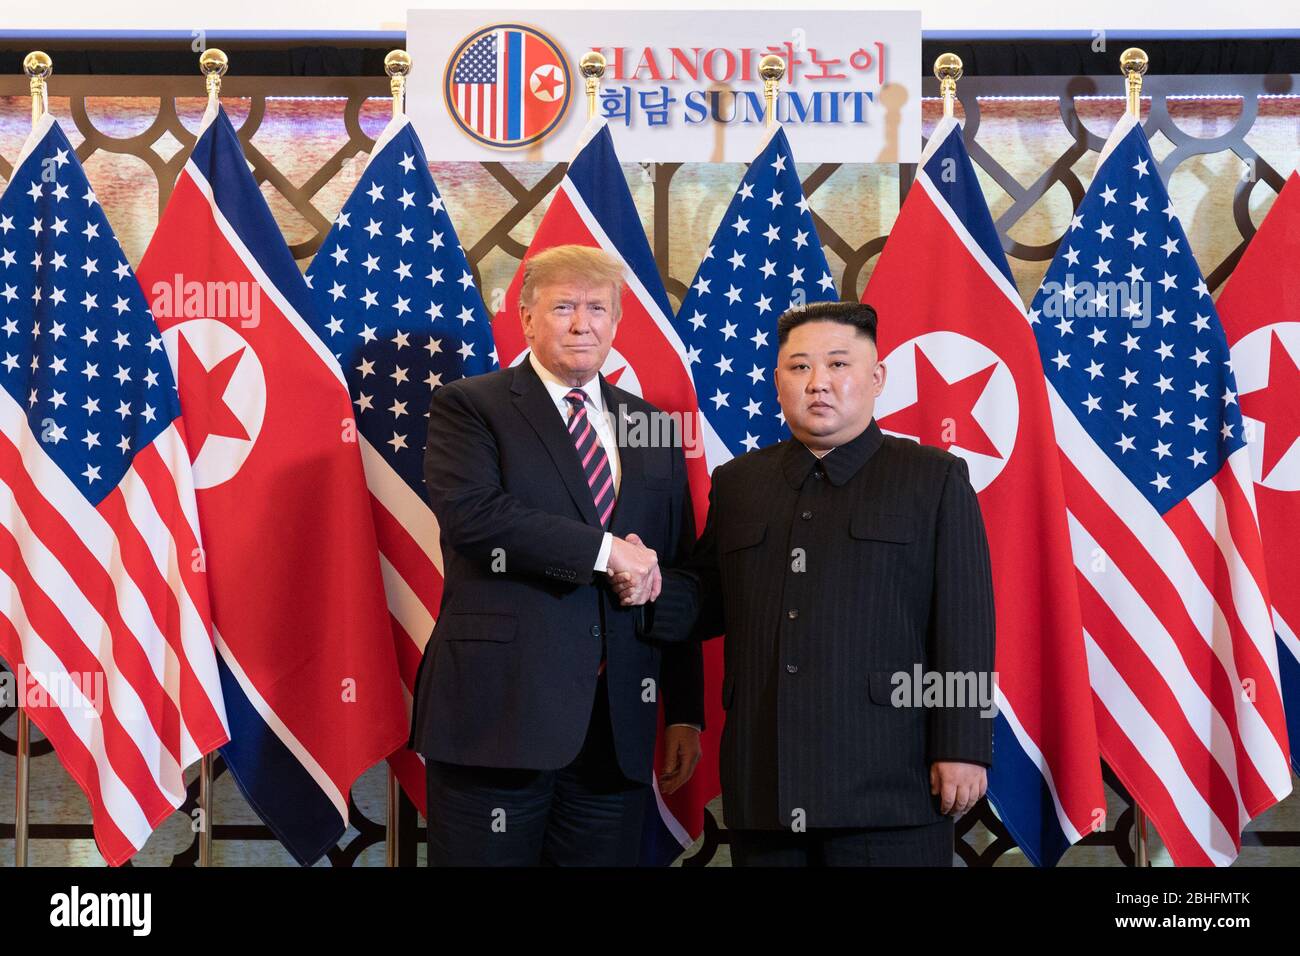 Hanoi, Vietnam. 27th Feb, 2019. President Donald J. Trump is greeted by Kim Jong Un, Chairman of the State Affairs Commission of the Democratic PeopleÕs Republic of Korea, Wednesday, Feb. 27, 2019, at the Sofitel Legend Metropole hotel in Hanoi, for their second summit. People: President Donald Trump, Kim Jong Un Credit: Storms Media Group/Alamy Live News Stock Photo